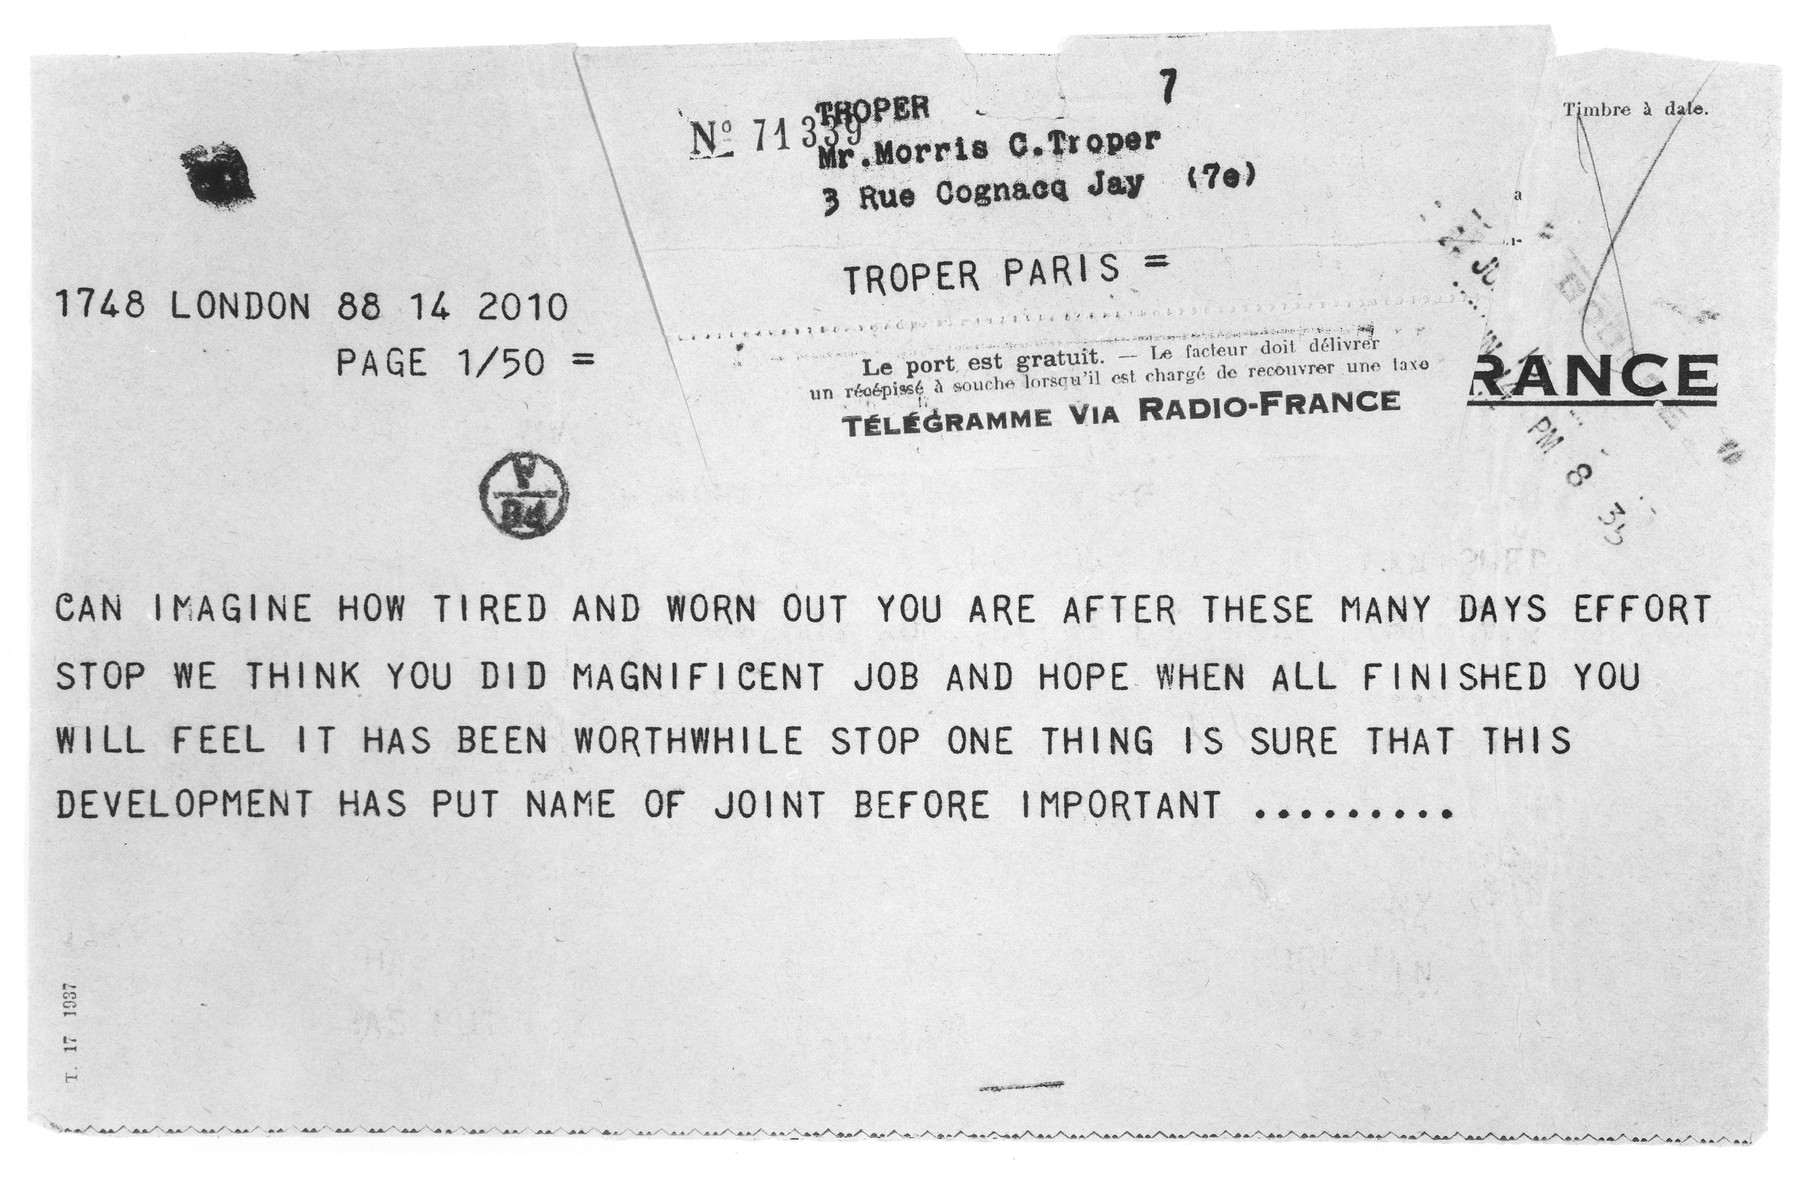 Telegram sent to JDC European Director Morris Troper in Paris by JDC Chairman Paul Baerwald and Harold Linder in London thanking him for his hard work in the successful resolution of the MS St. Louis refugee crisis.